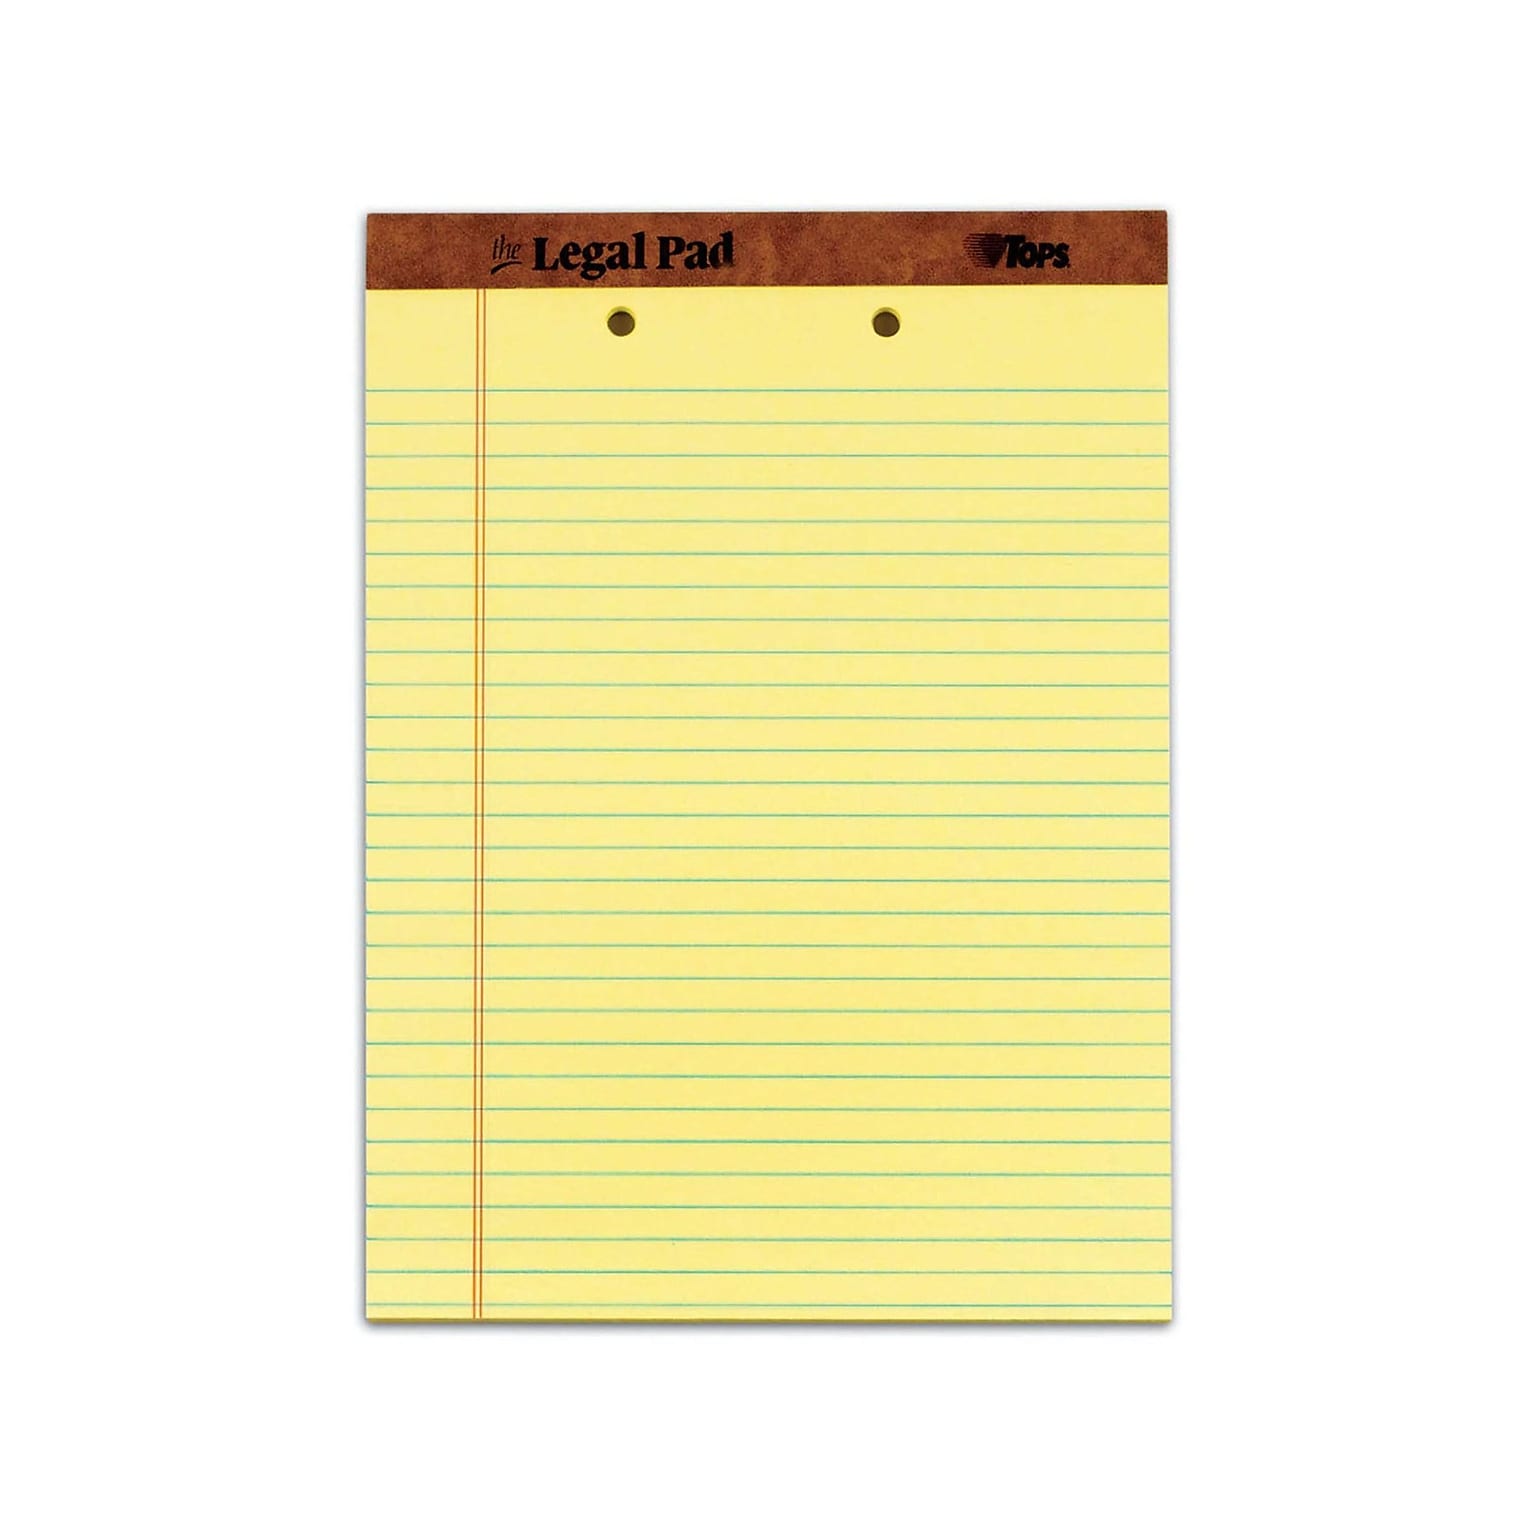 TOPS The Legal Pad Notepads, 8.5 x 11.75, Wide Ruled, Canary, 50 Sheets/Pad, 12 Pads/Pack (TOP 7531)